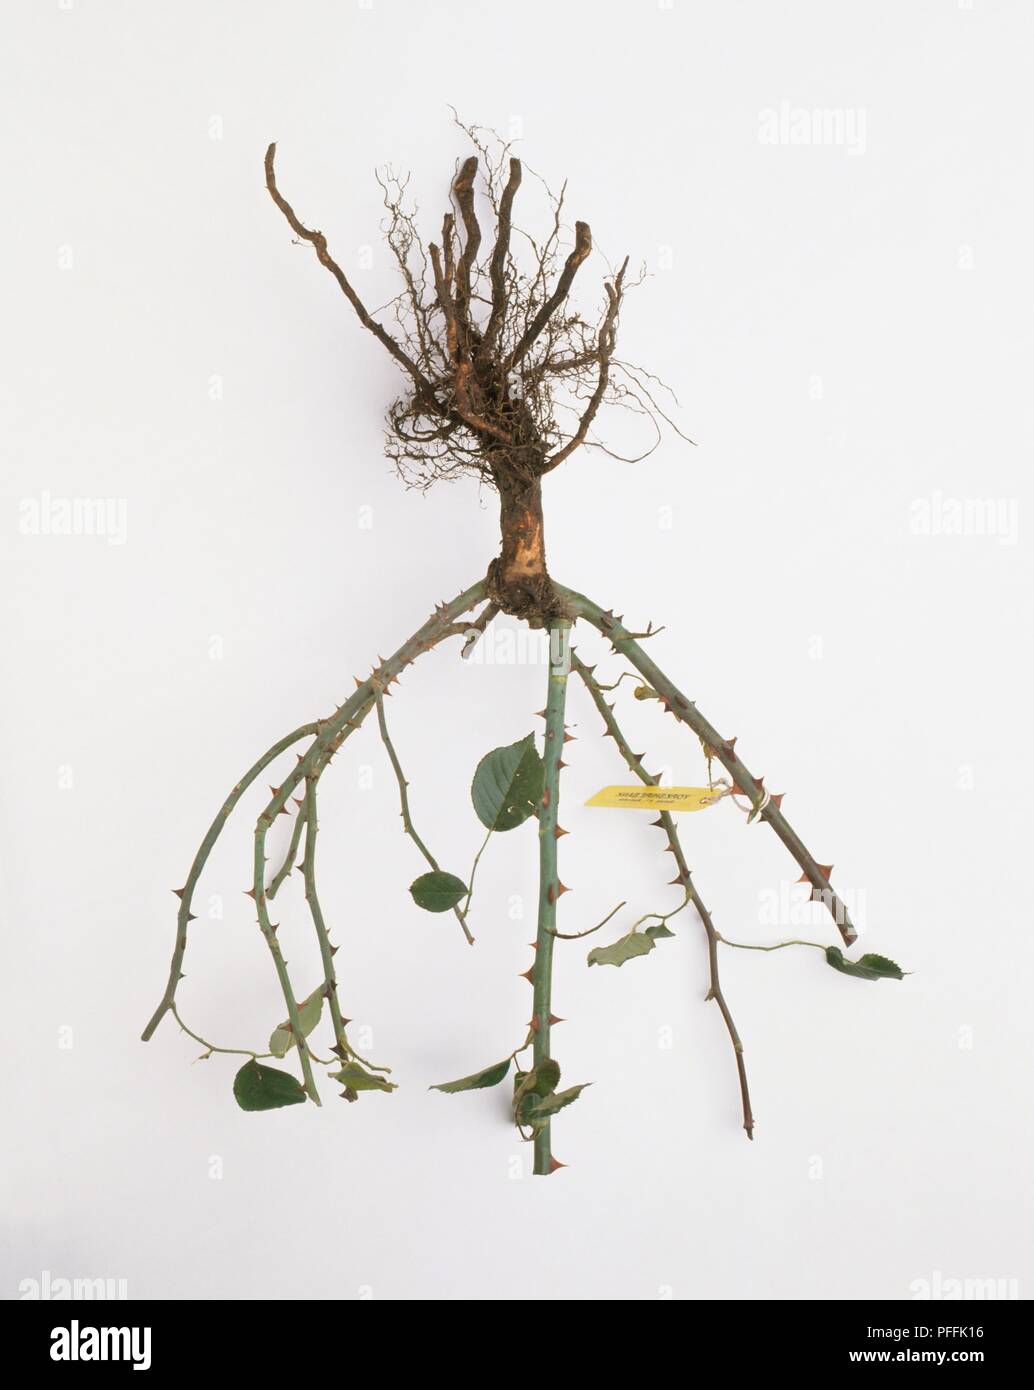 Bush rose showing healthy shoots and good network of fibrous roots Stock Photo